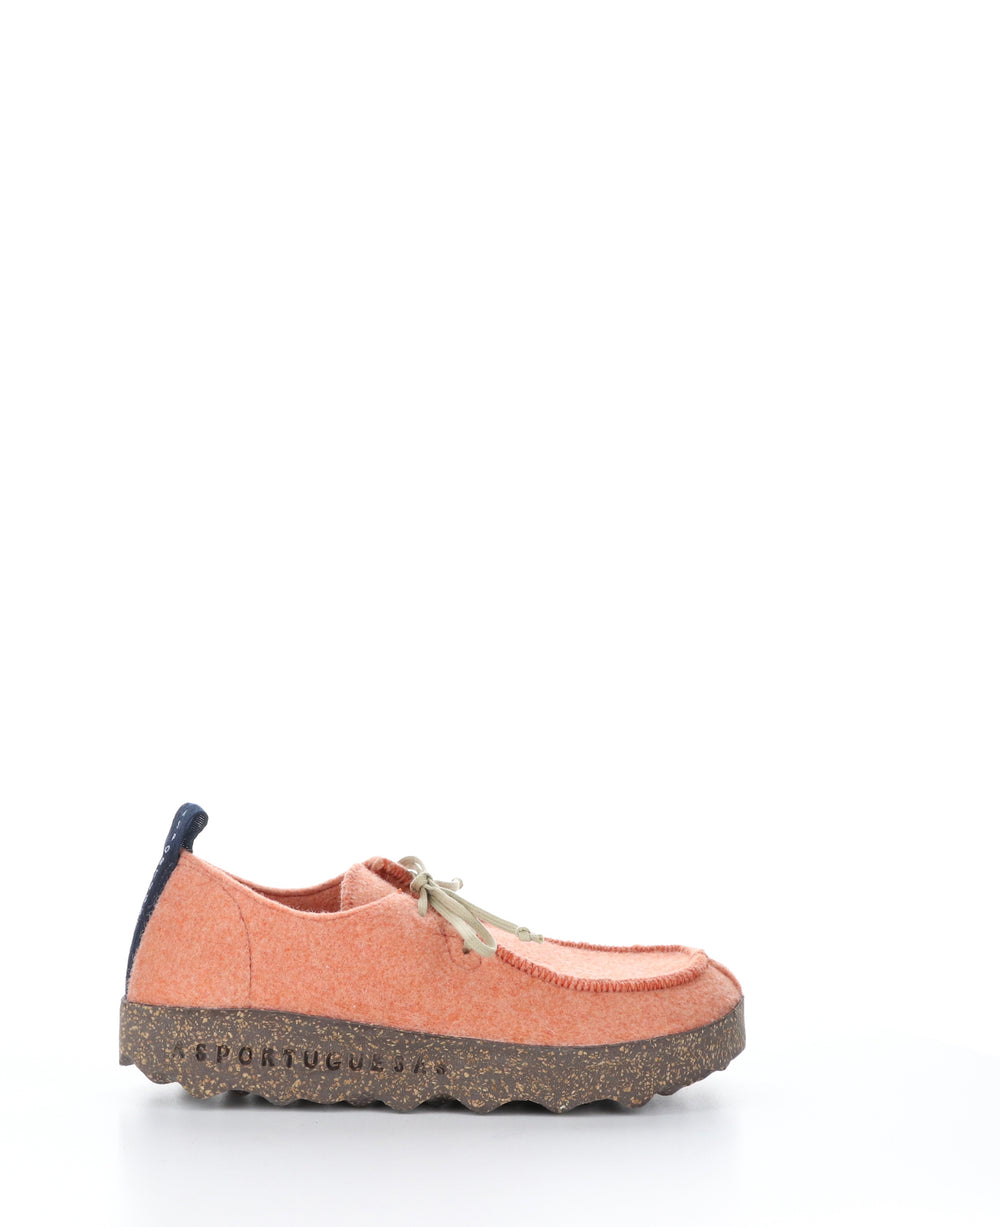 CHAT063ASP Tangerine Round Toe Shoes